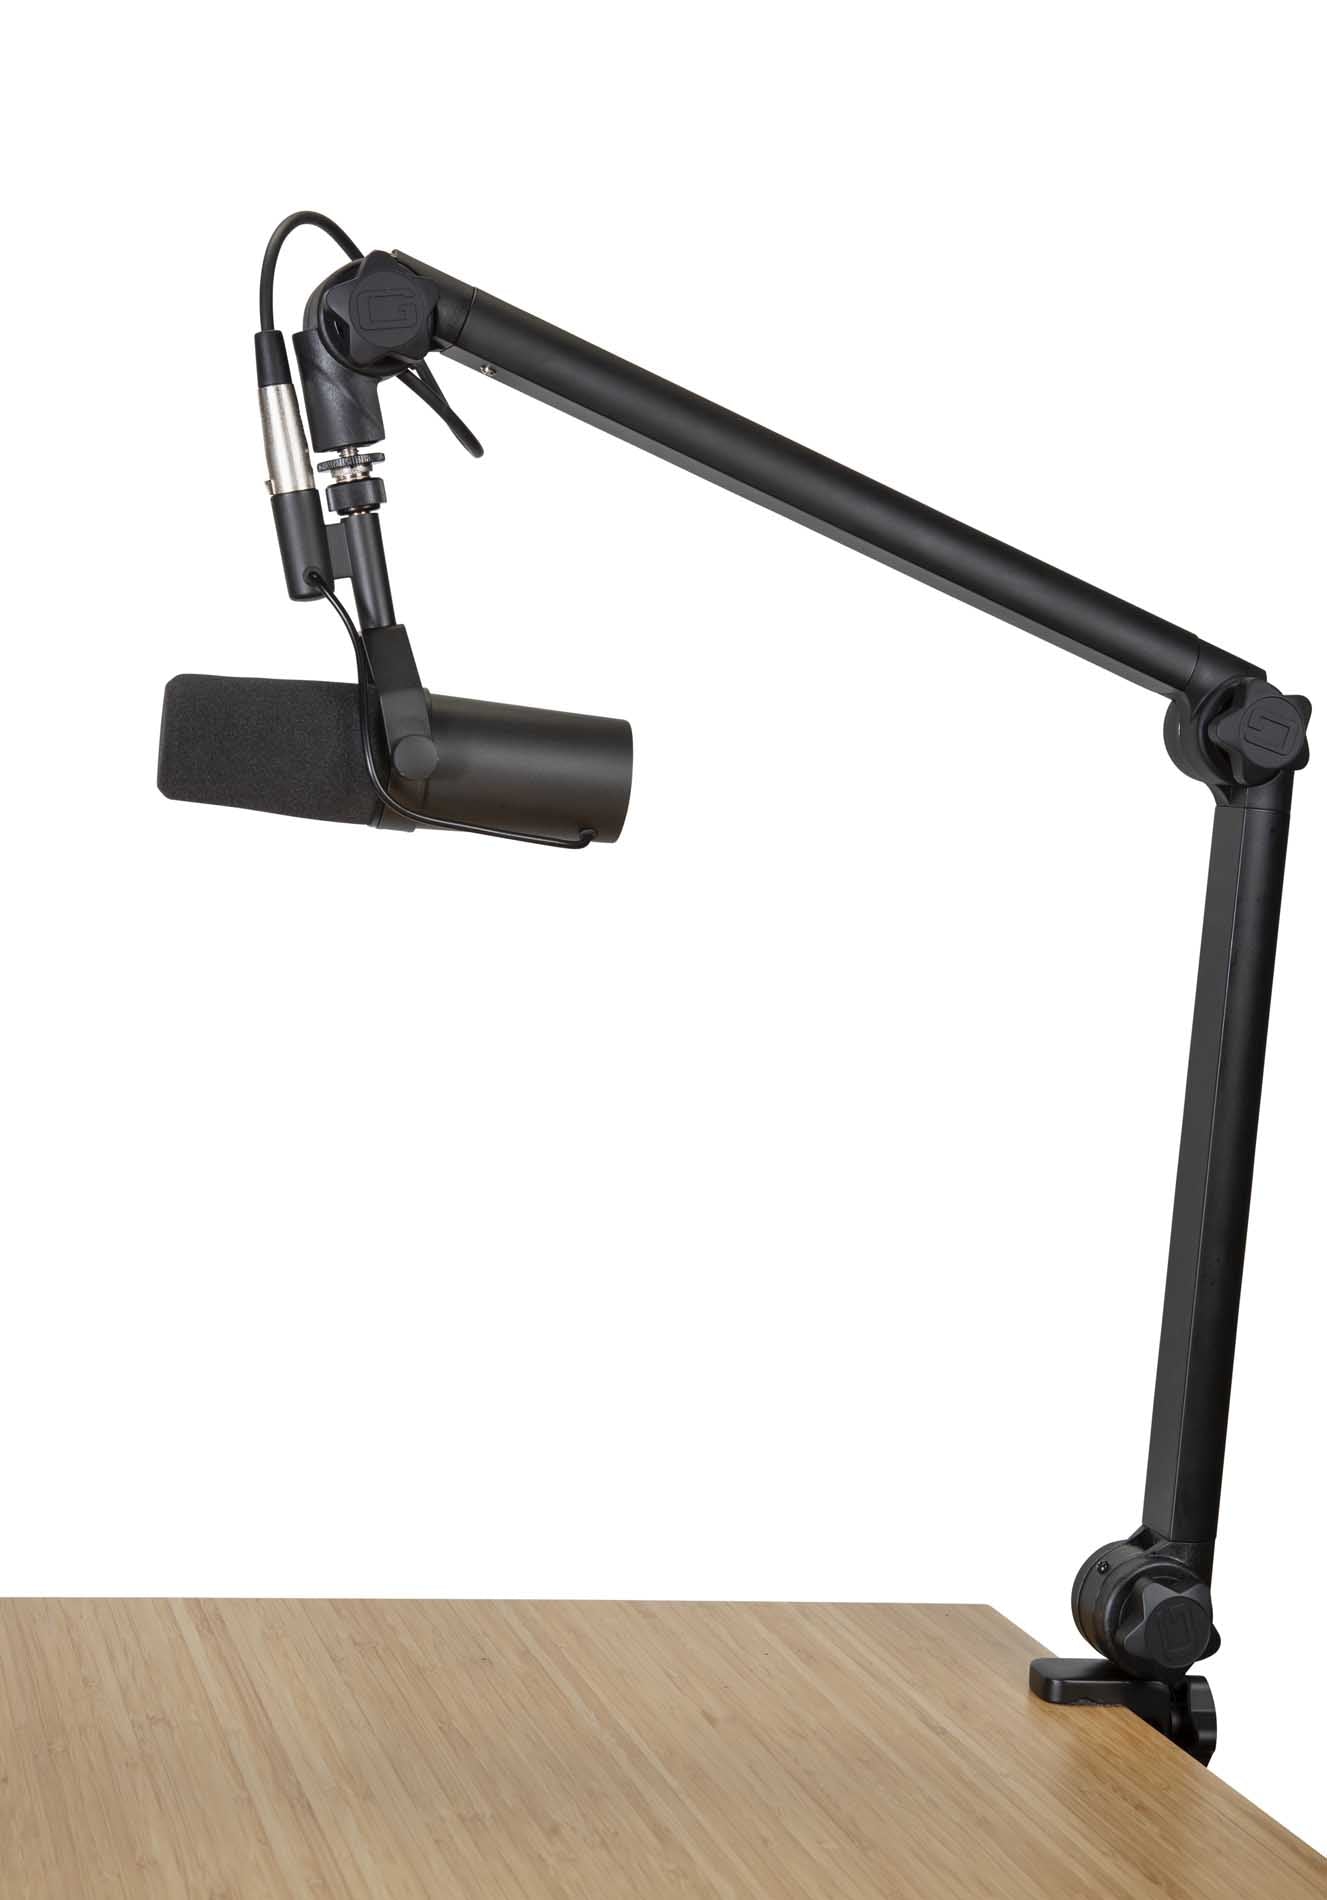 Shure SM7B Podcast Package - with Mic Booster and Desktop Boom Stand - FetHead + GFWMICBCBM3000 - Hollywood DJ